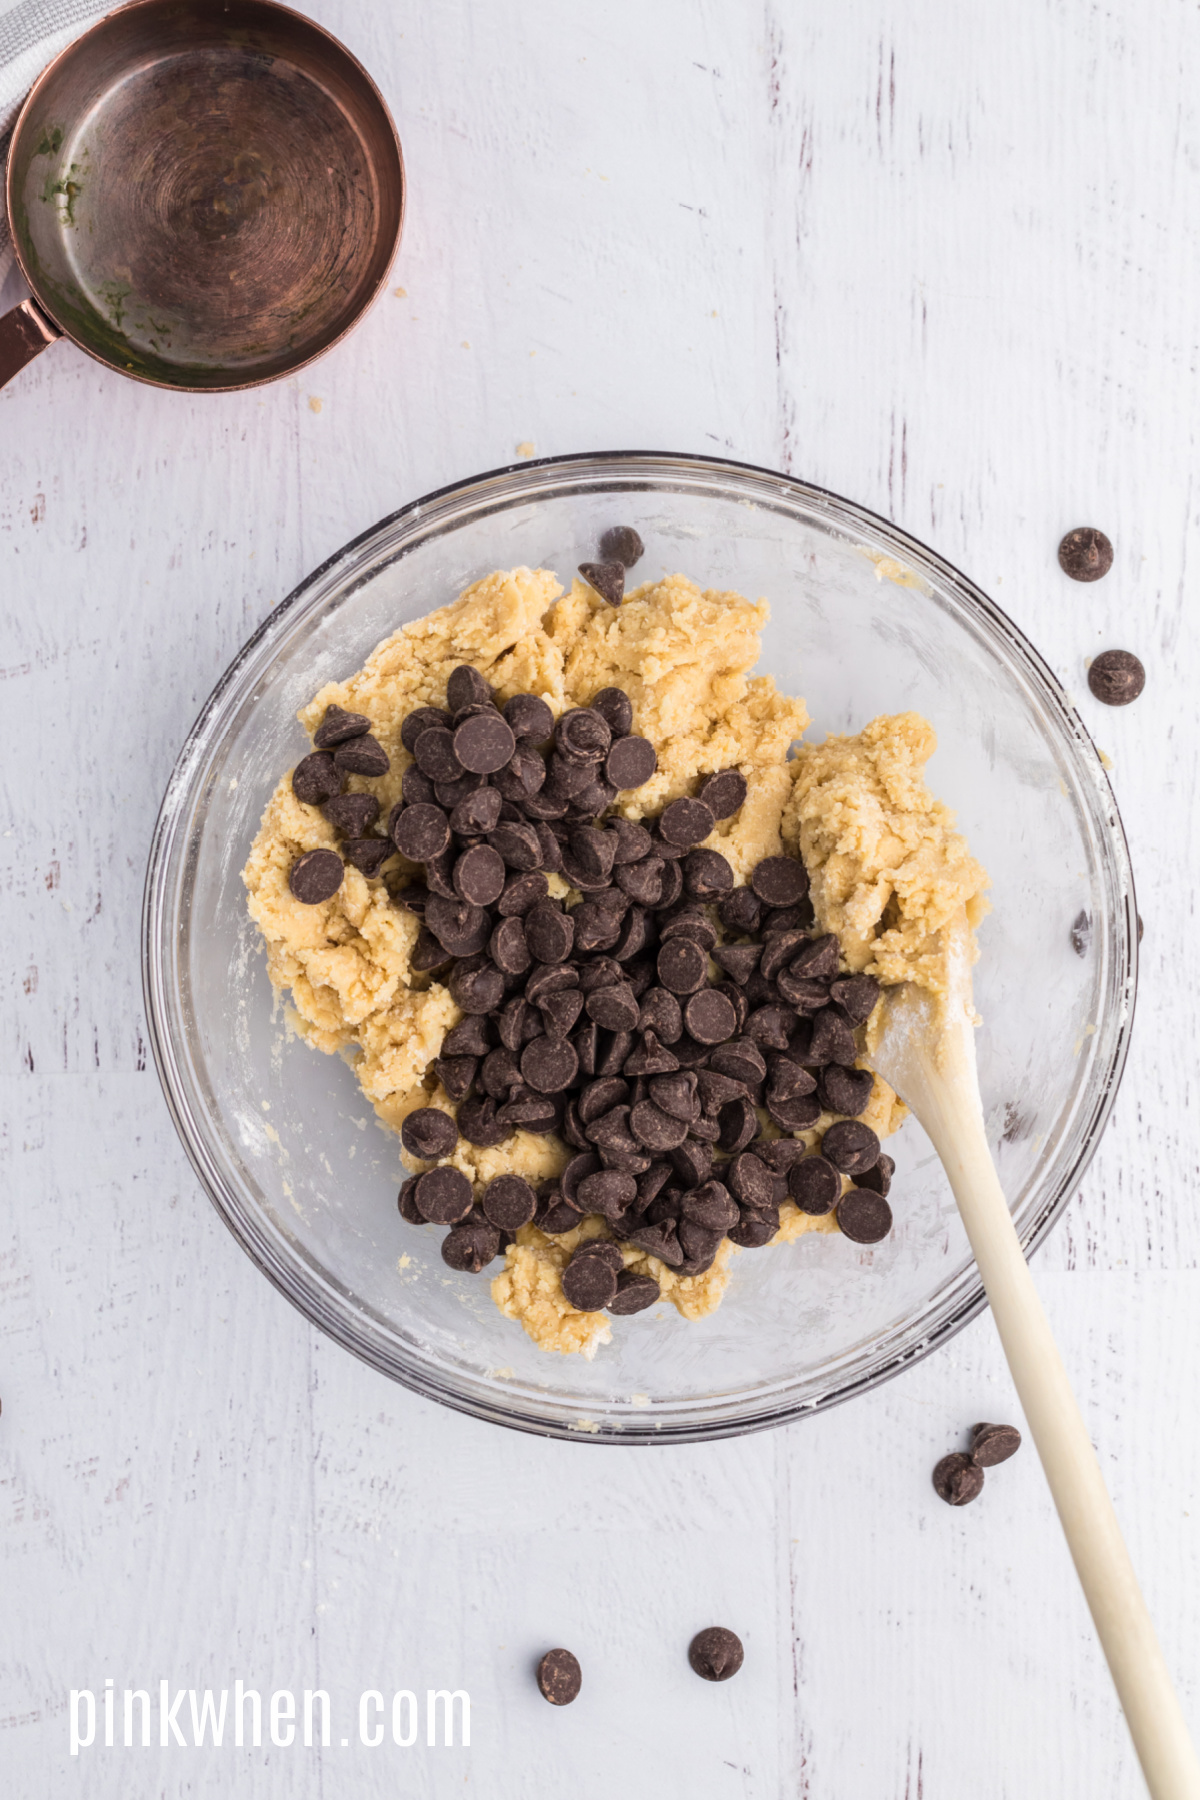 Chocolate chips added to the cookie dough.